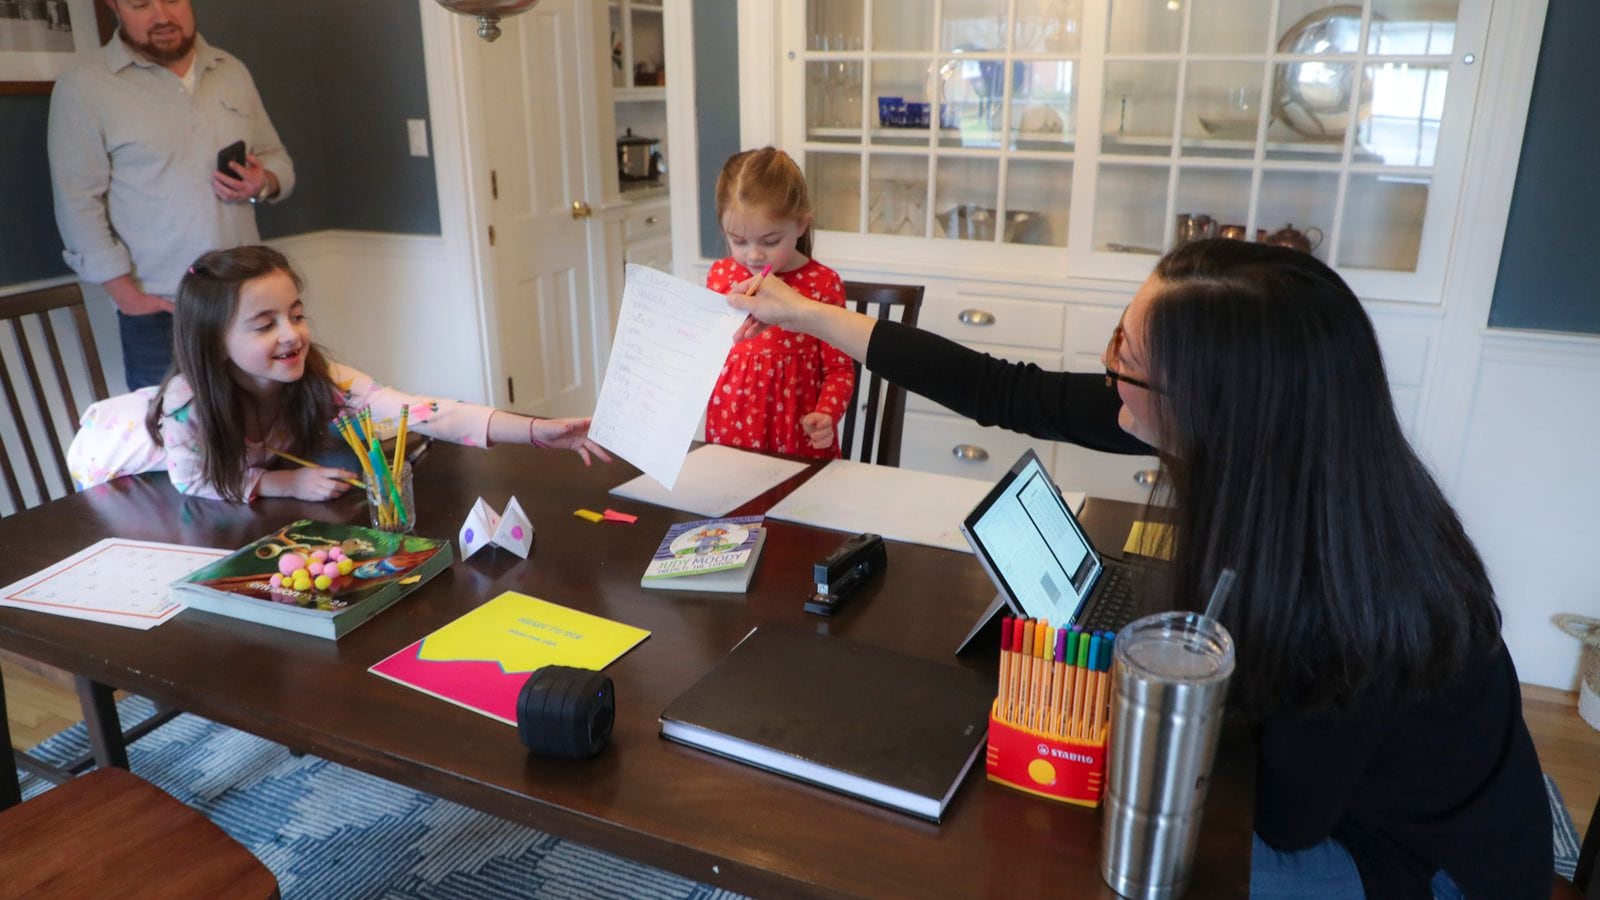 Sarah Yunits checks her daugher Ada's homework while Cora waits her turn as dad Conor Yunits is on a work conference call at their home in Brockton on March 19, 2020. Because of the coronavirus, the Yunits are able to perform their jobs at home and are home schooling their two children.